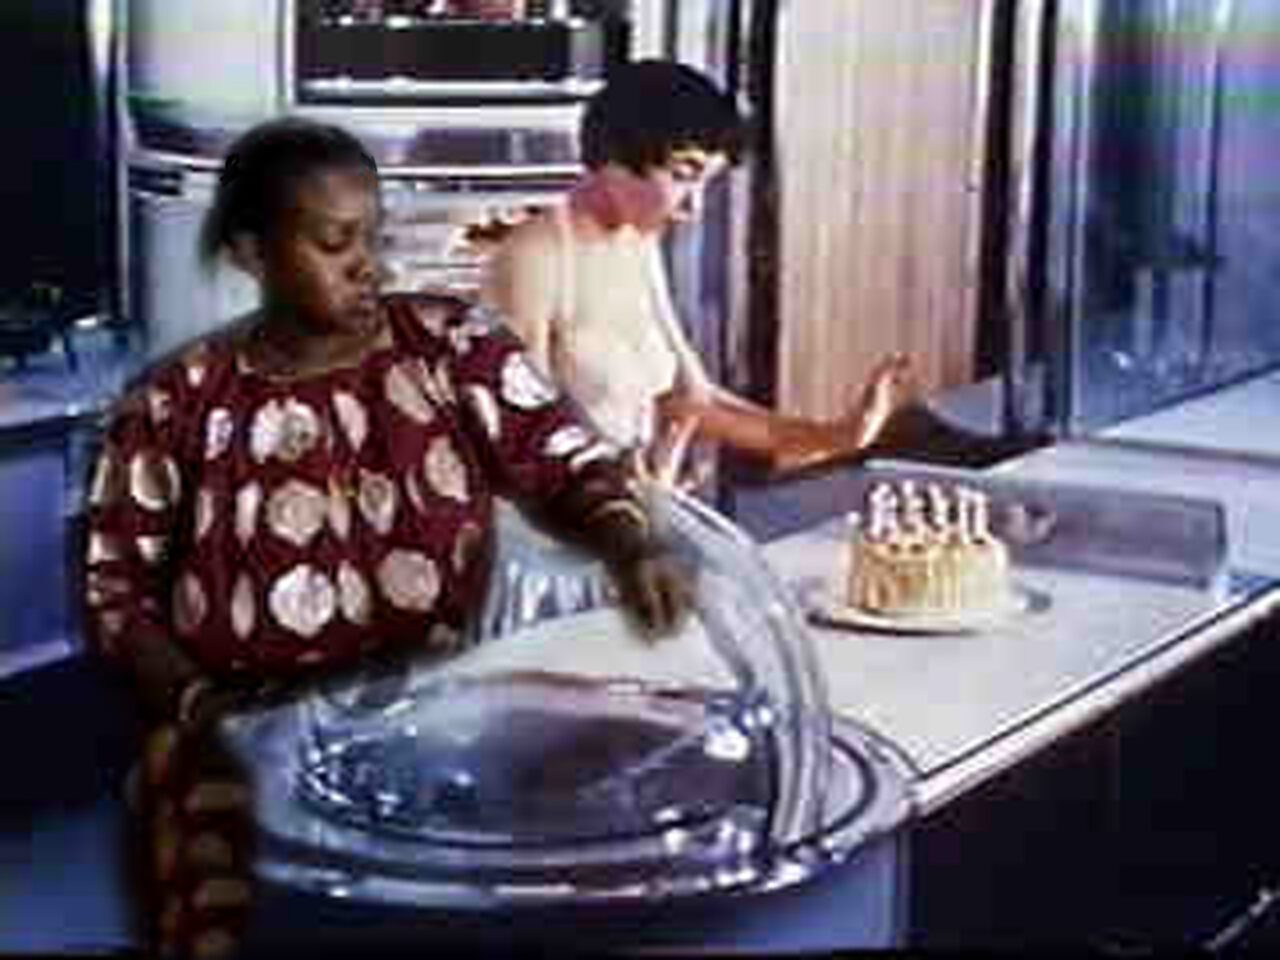 Fatimah Tuggar, Fusion Cuisine (video stills), 2000. Video Collage, 15 minutes, 40 seconds. Produced at the Kitchen, New York. Courtesy of BintaZarah Studios